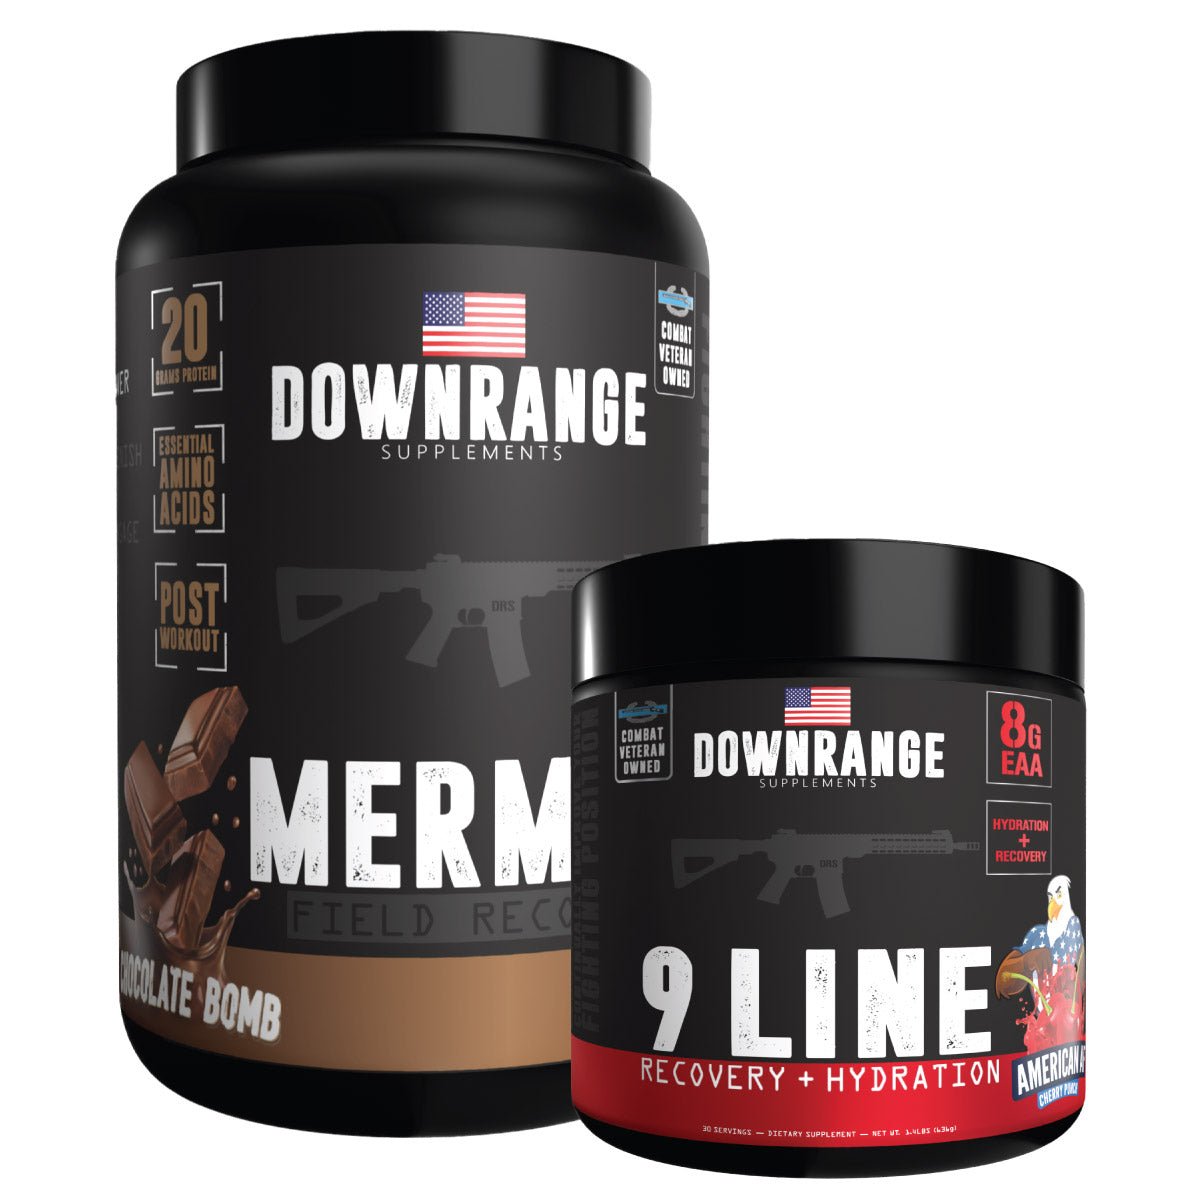 RECOVERY STACK - DownRange Supplements